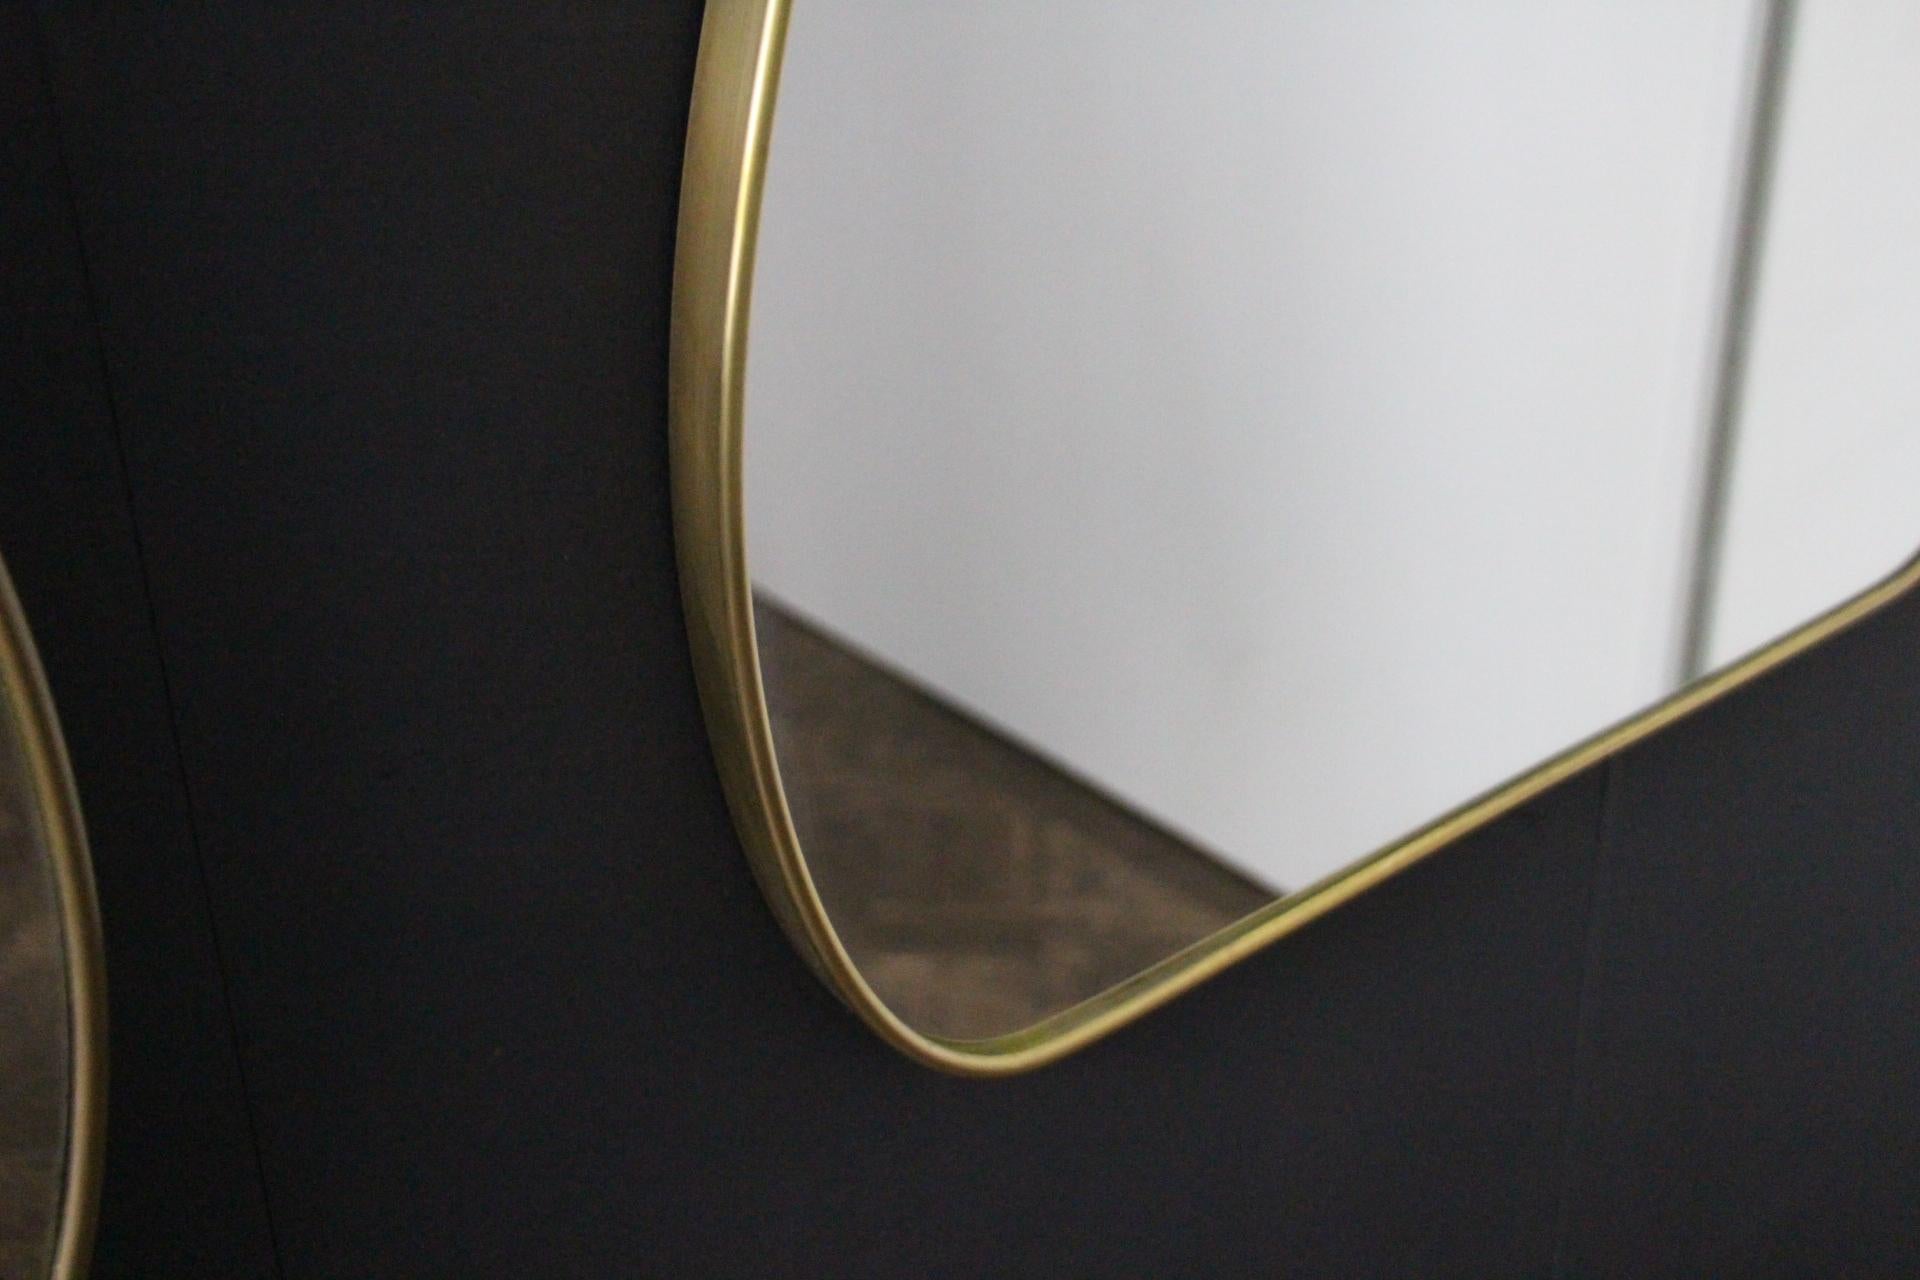 Large 1950's Modernist Shaped Brass Wall Mirror , Gio Ponti Style For Sale 9